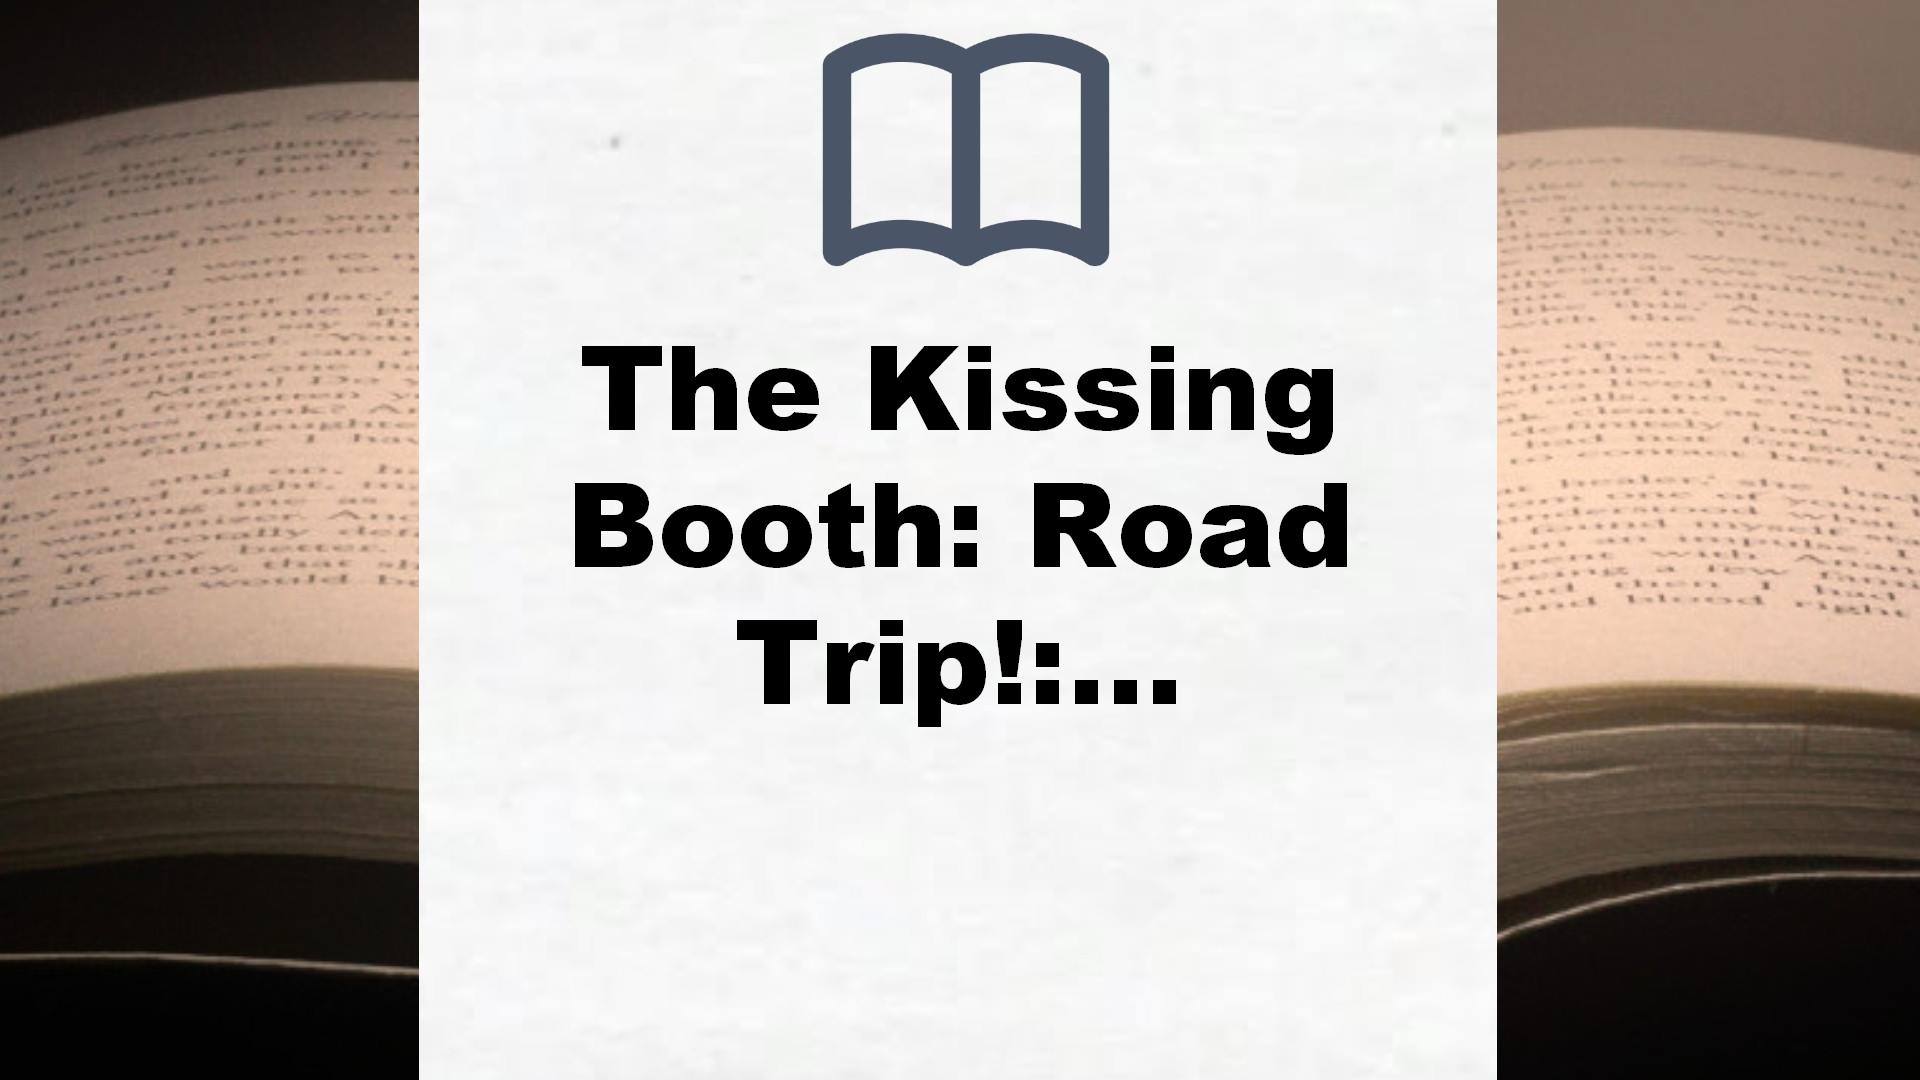 The Kissing Booth: Road Trip!: World Book Day 2020 – Reseña del libro